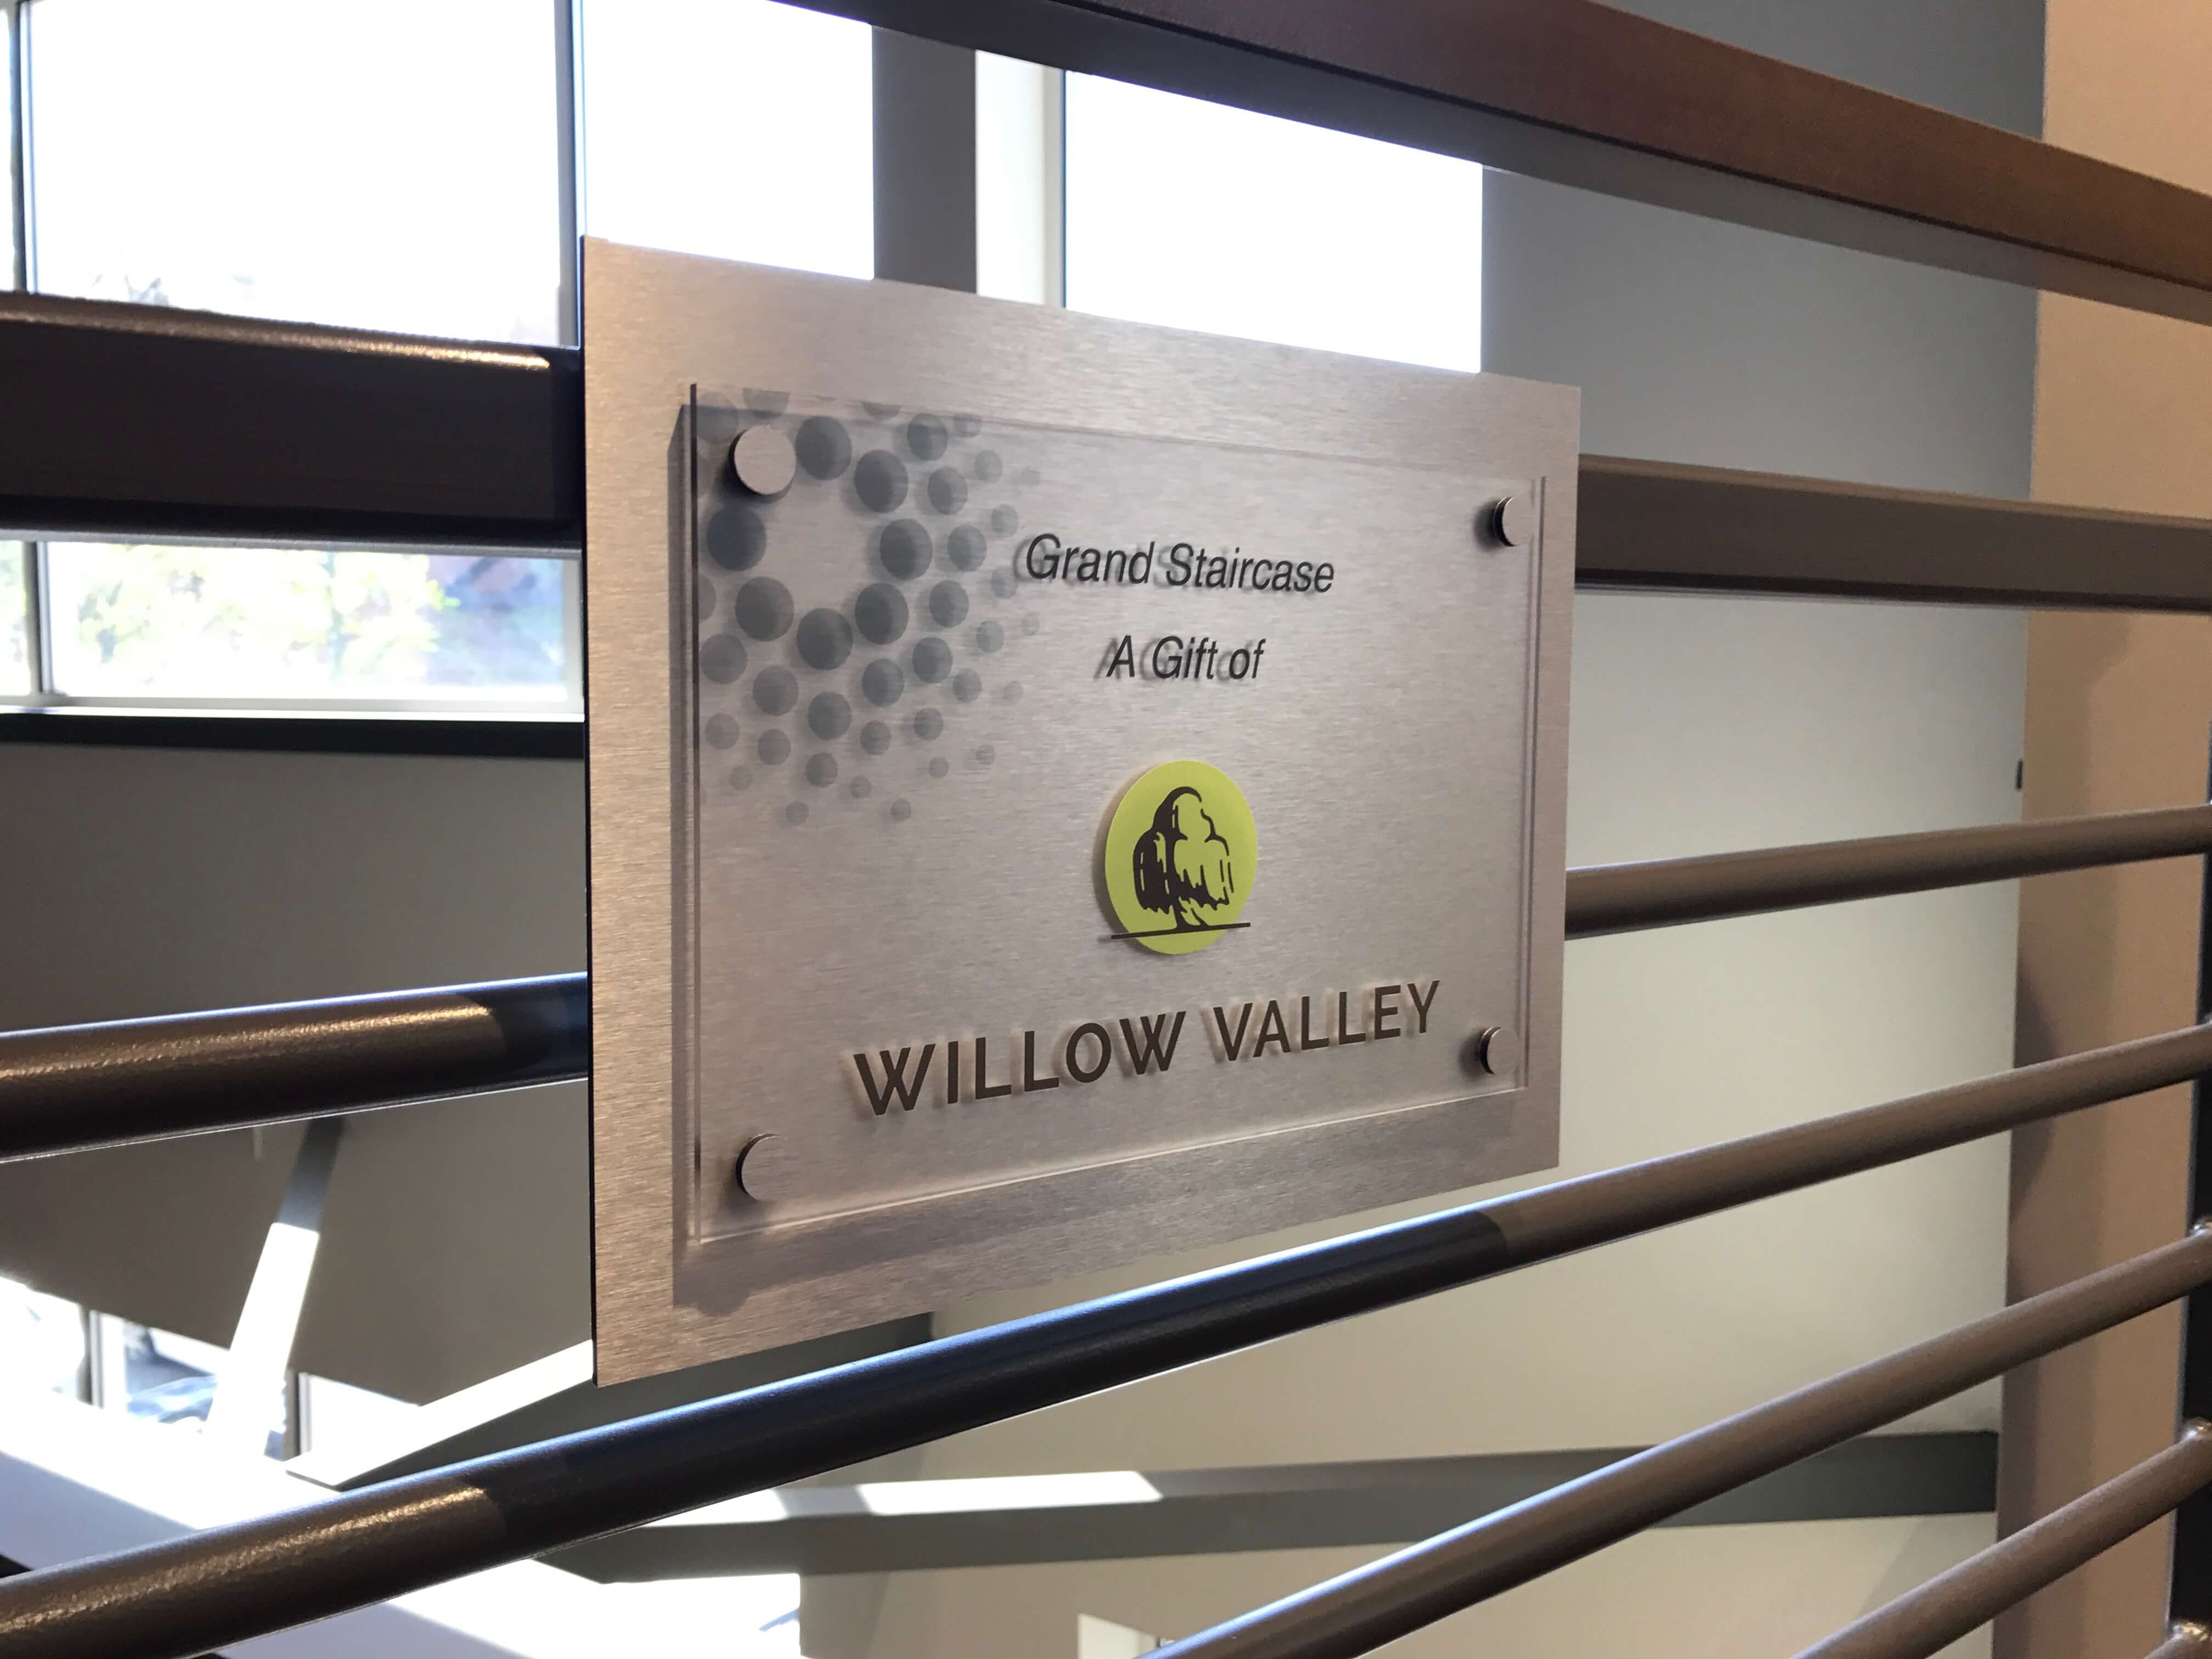 Willow Valley Plaque on Staircase